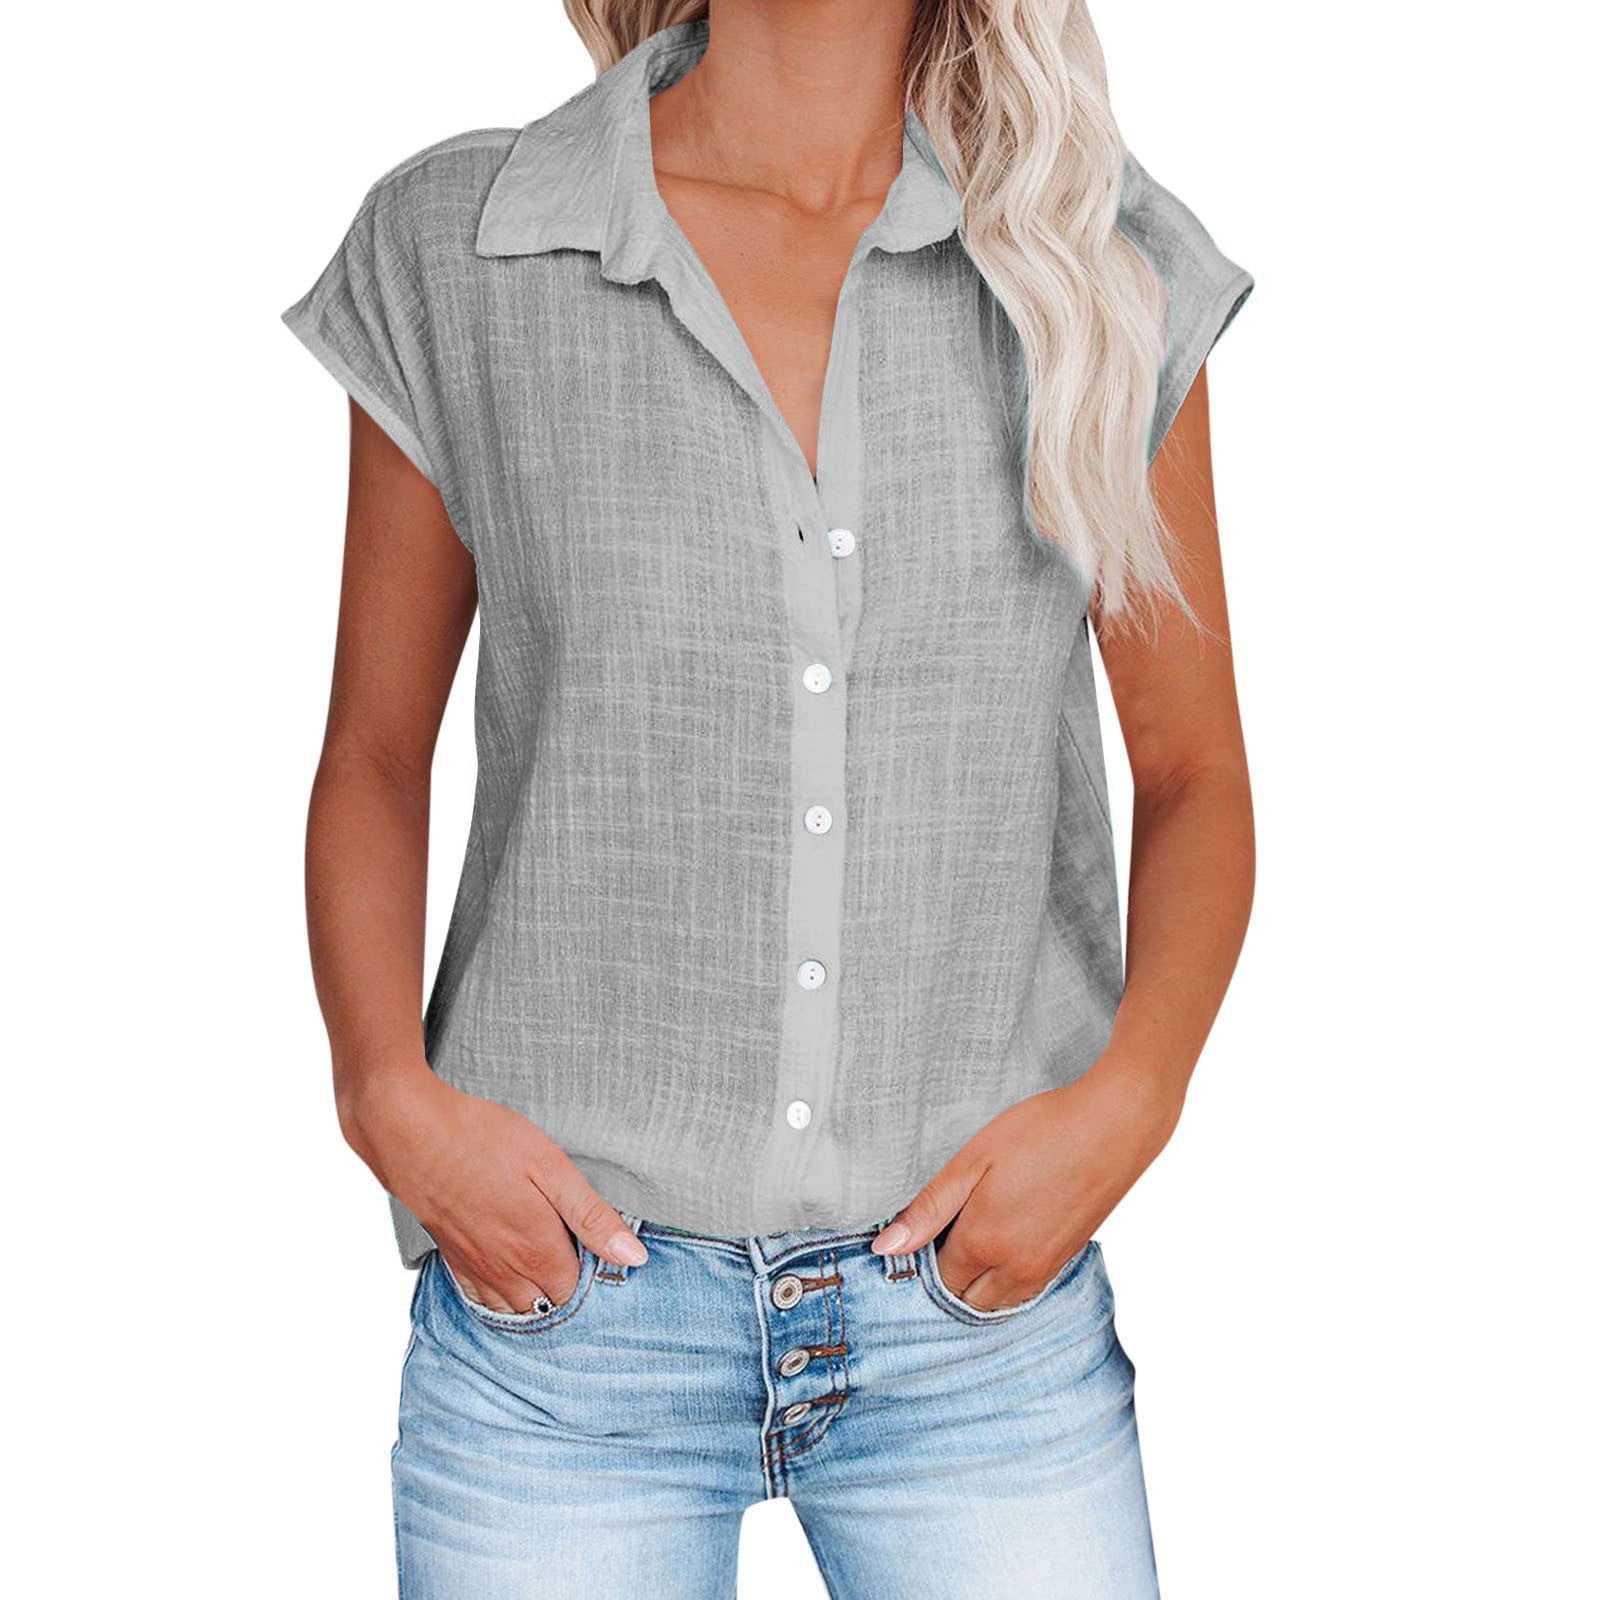 Rloper-Lop Womens Short Sleeve Cotton Button Down Up Shirt Collared V ...